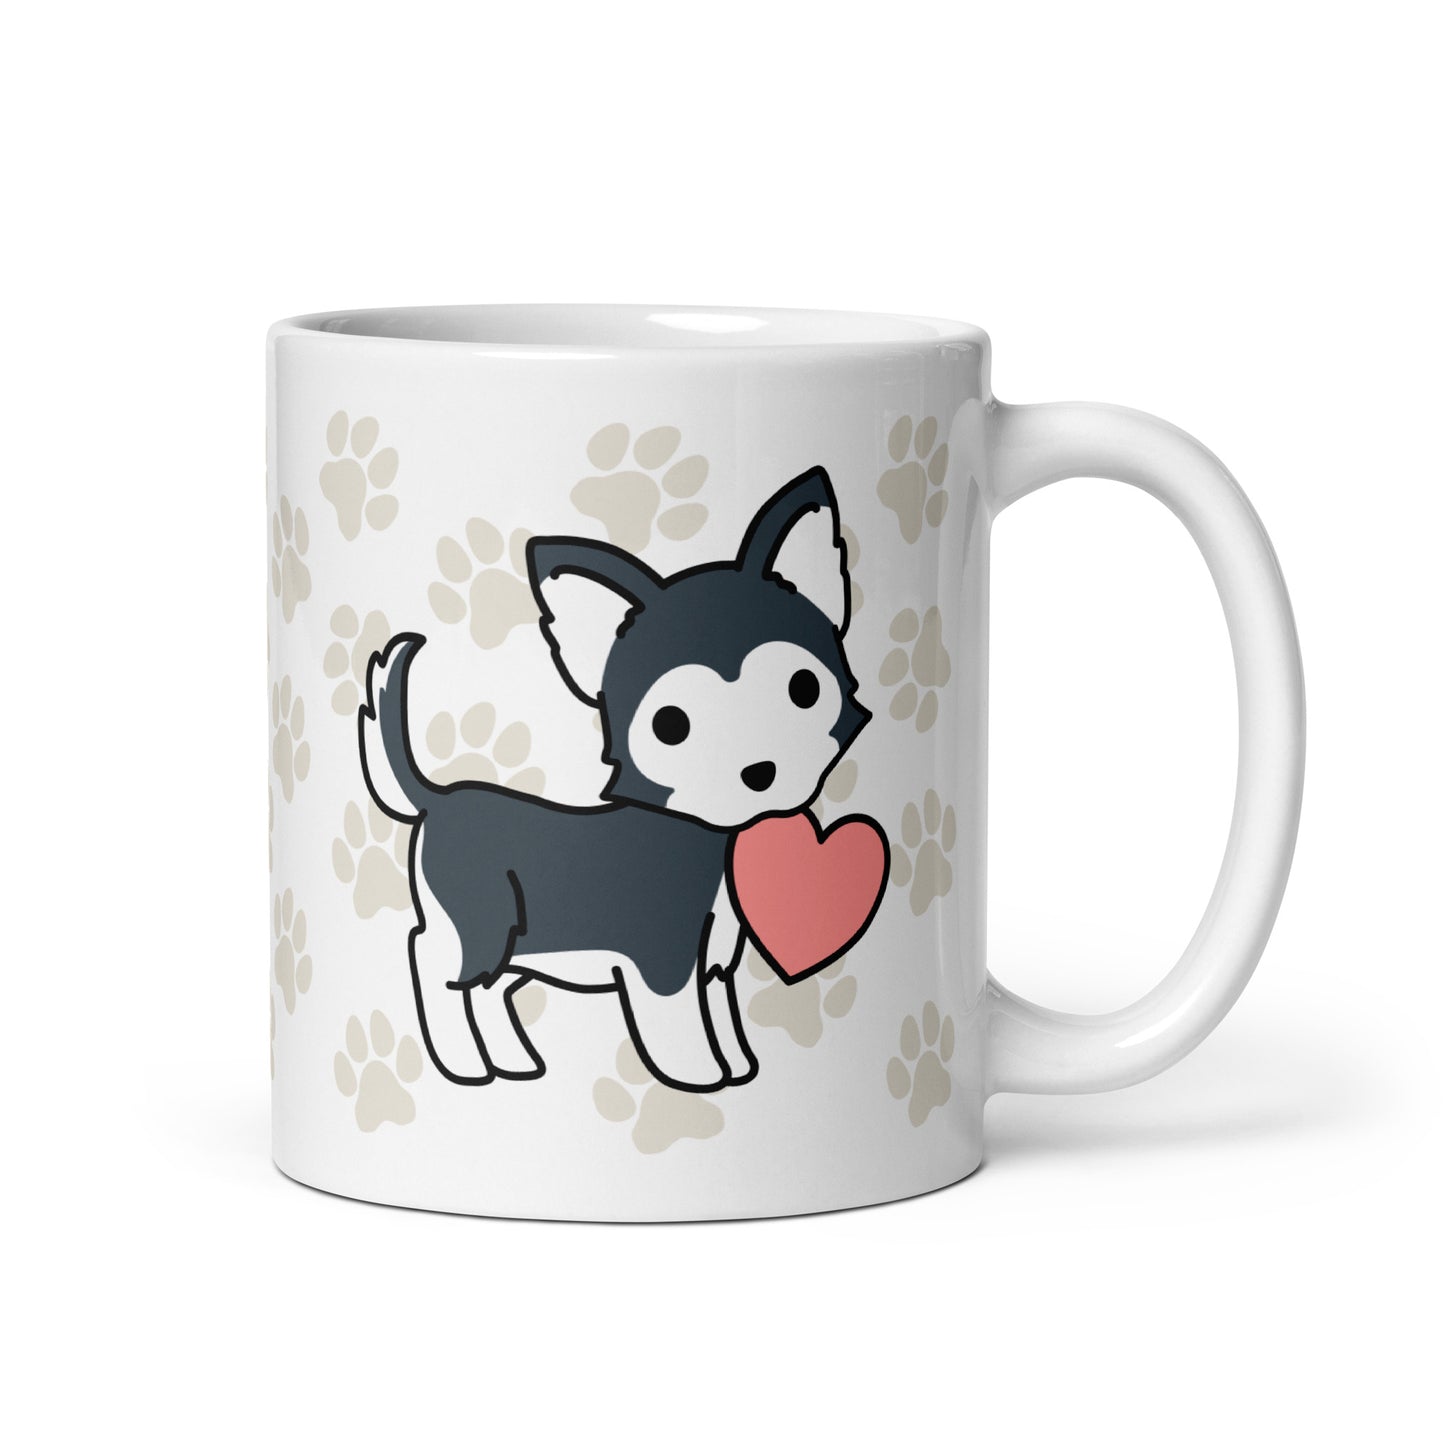 A white 11 ounce ceramic mug with a pattern of light brown pawprints all over. The mug also features a stylized illustration of a Husky holding a heart in its mouth.